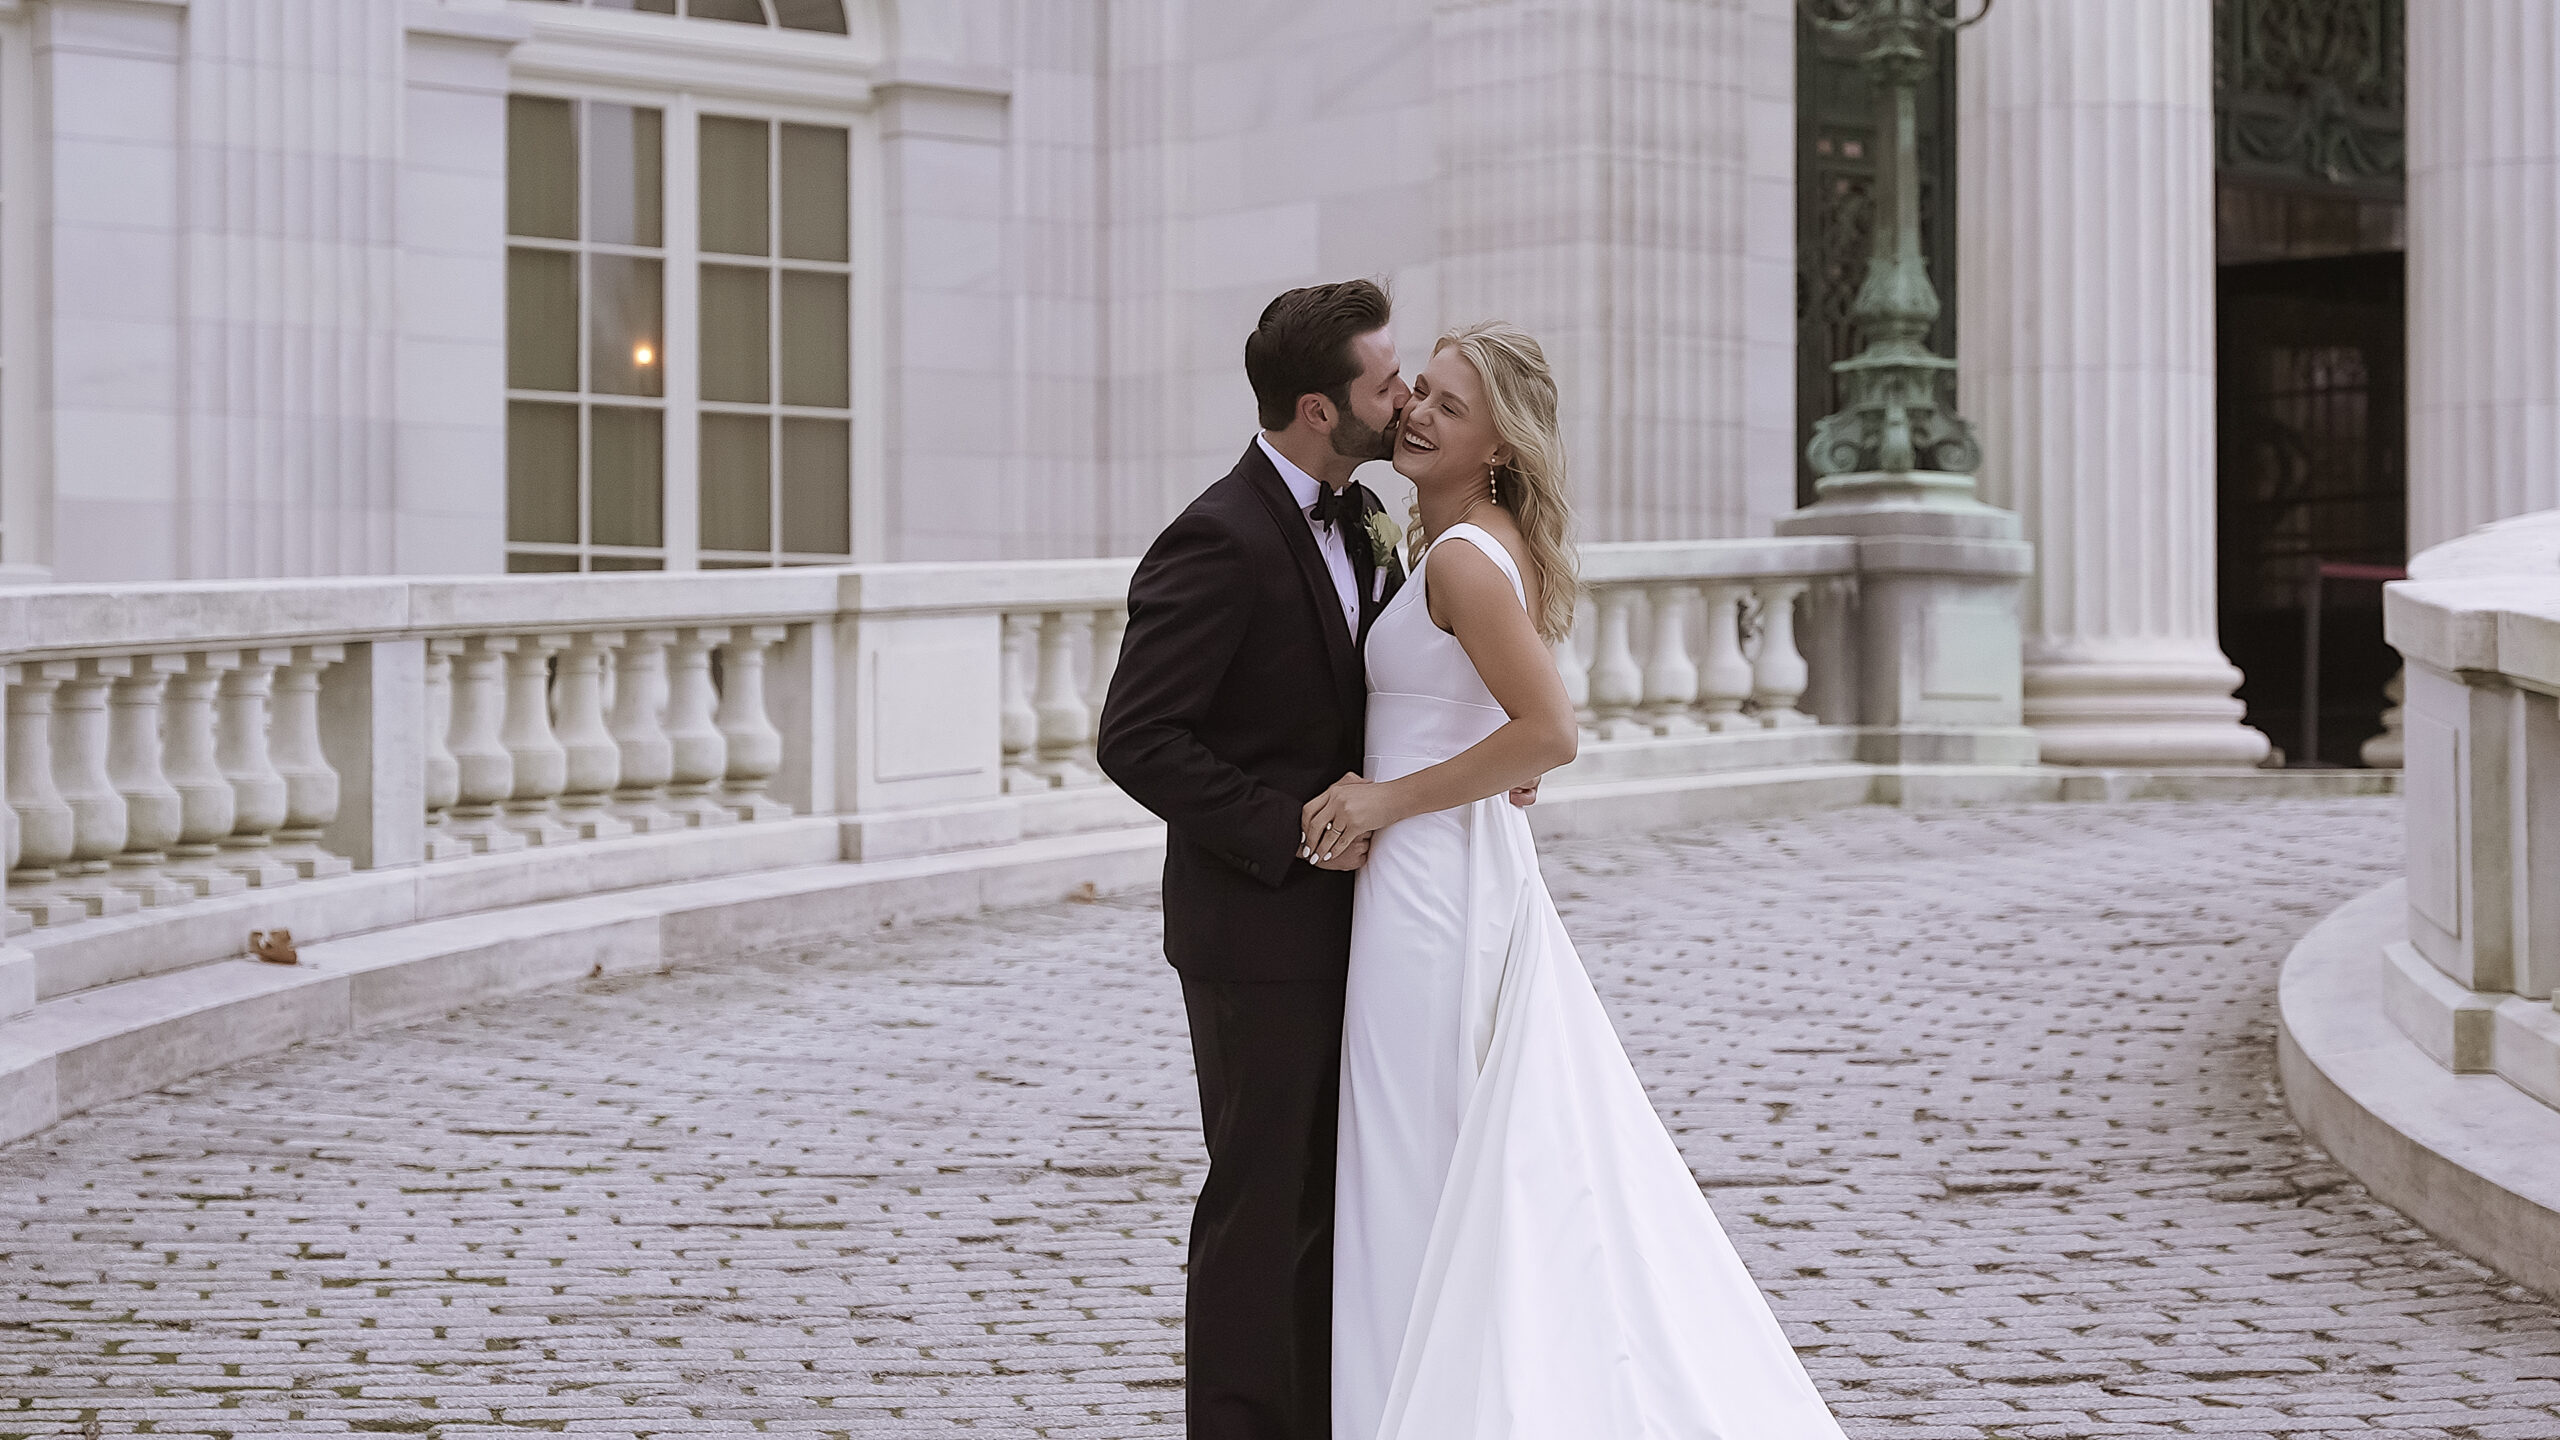 Couple standing in front of a marble building with large pillars and windows. They are facing either while standing on a cobblestone walk way. Groom is kissing bride on her right cheek and the bride is smiling. They are holding hands. Bride is wearing an elegant white dress with a removable train. Groom is wearing a black tuxedo.